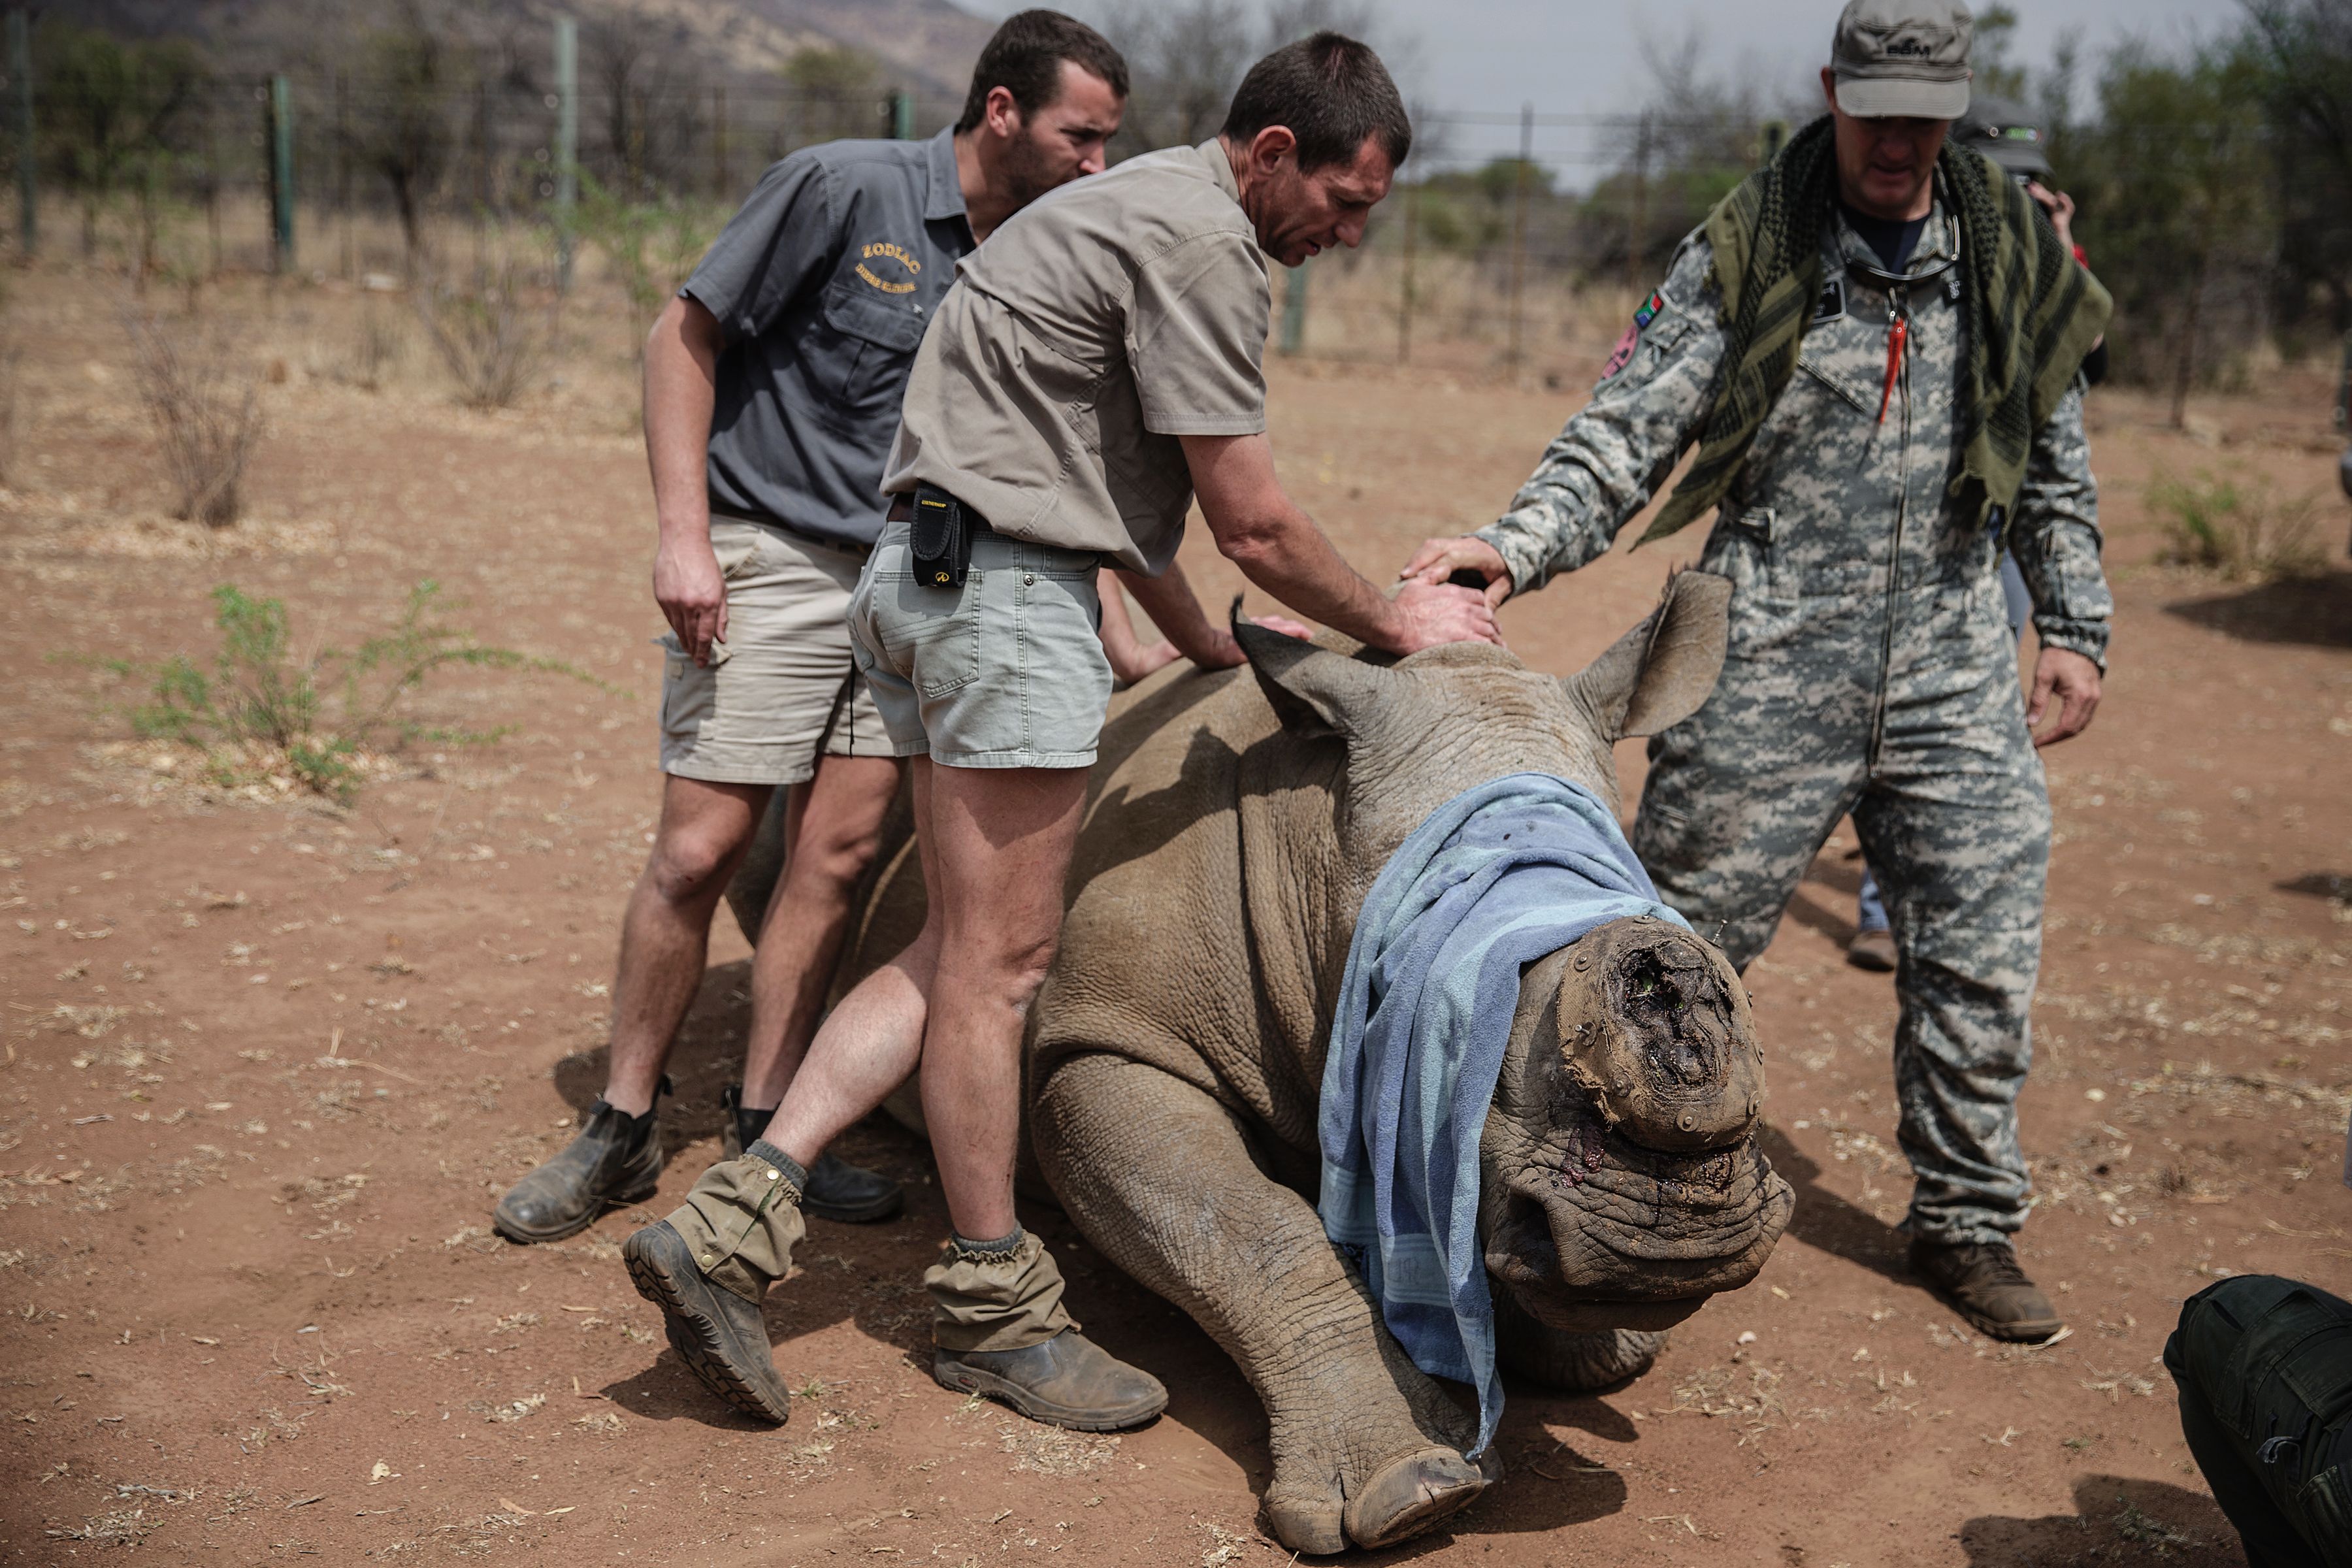 A veterinary from Saving the Survivors and RHINO911 crew attend to a previously wounded Rhino during an operation of RHINO911 Non Governamental Organization at the Pilanesberg National Park in the North West province, South Africa, on Sept. 19, 2016. (Gianluigi Guercia—AFP/Getty Images)